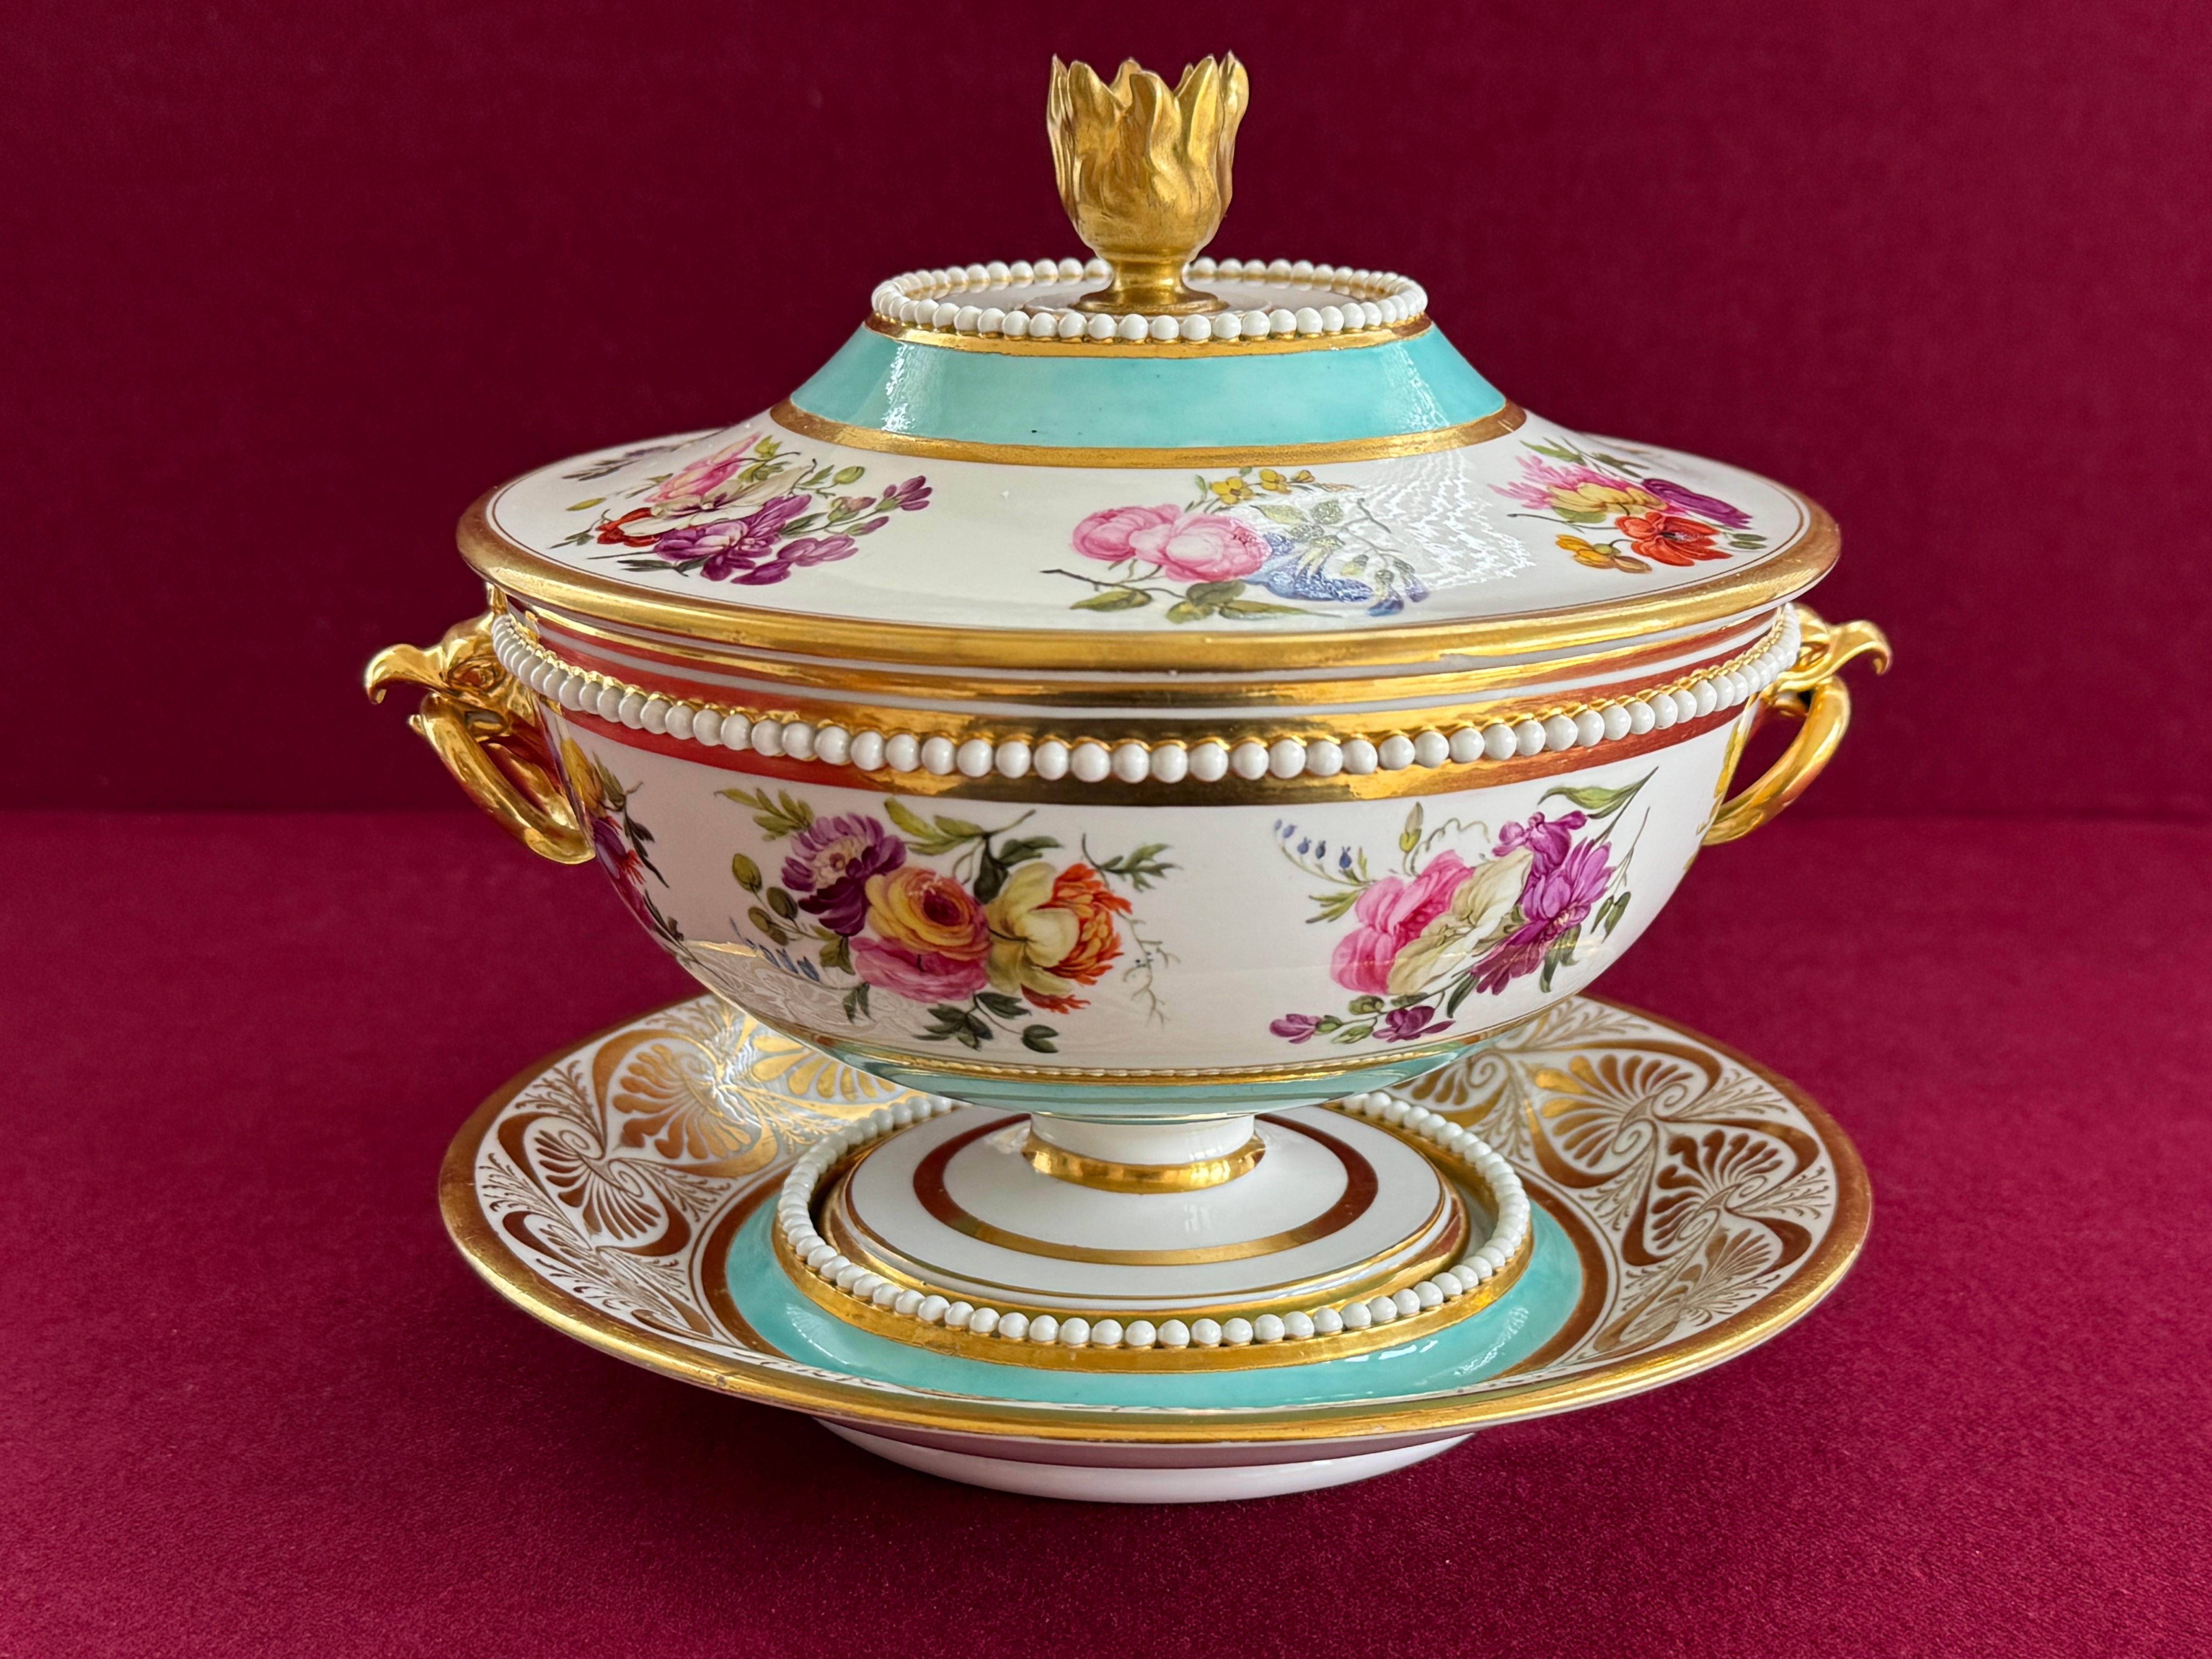 A fine Barr, Flight & Barr Worcester Porcelain Dessert Tureen and Stand c.1804-1807. Very finely decorated with painted bouquets of flowers in the manner of William Billingsley, with a broad turquoise ground border, applied pearls, flamiform finial,